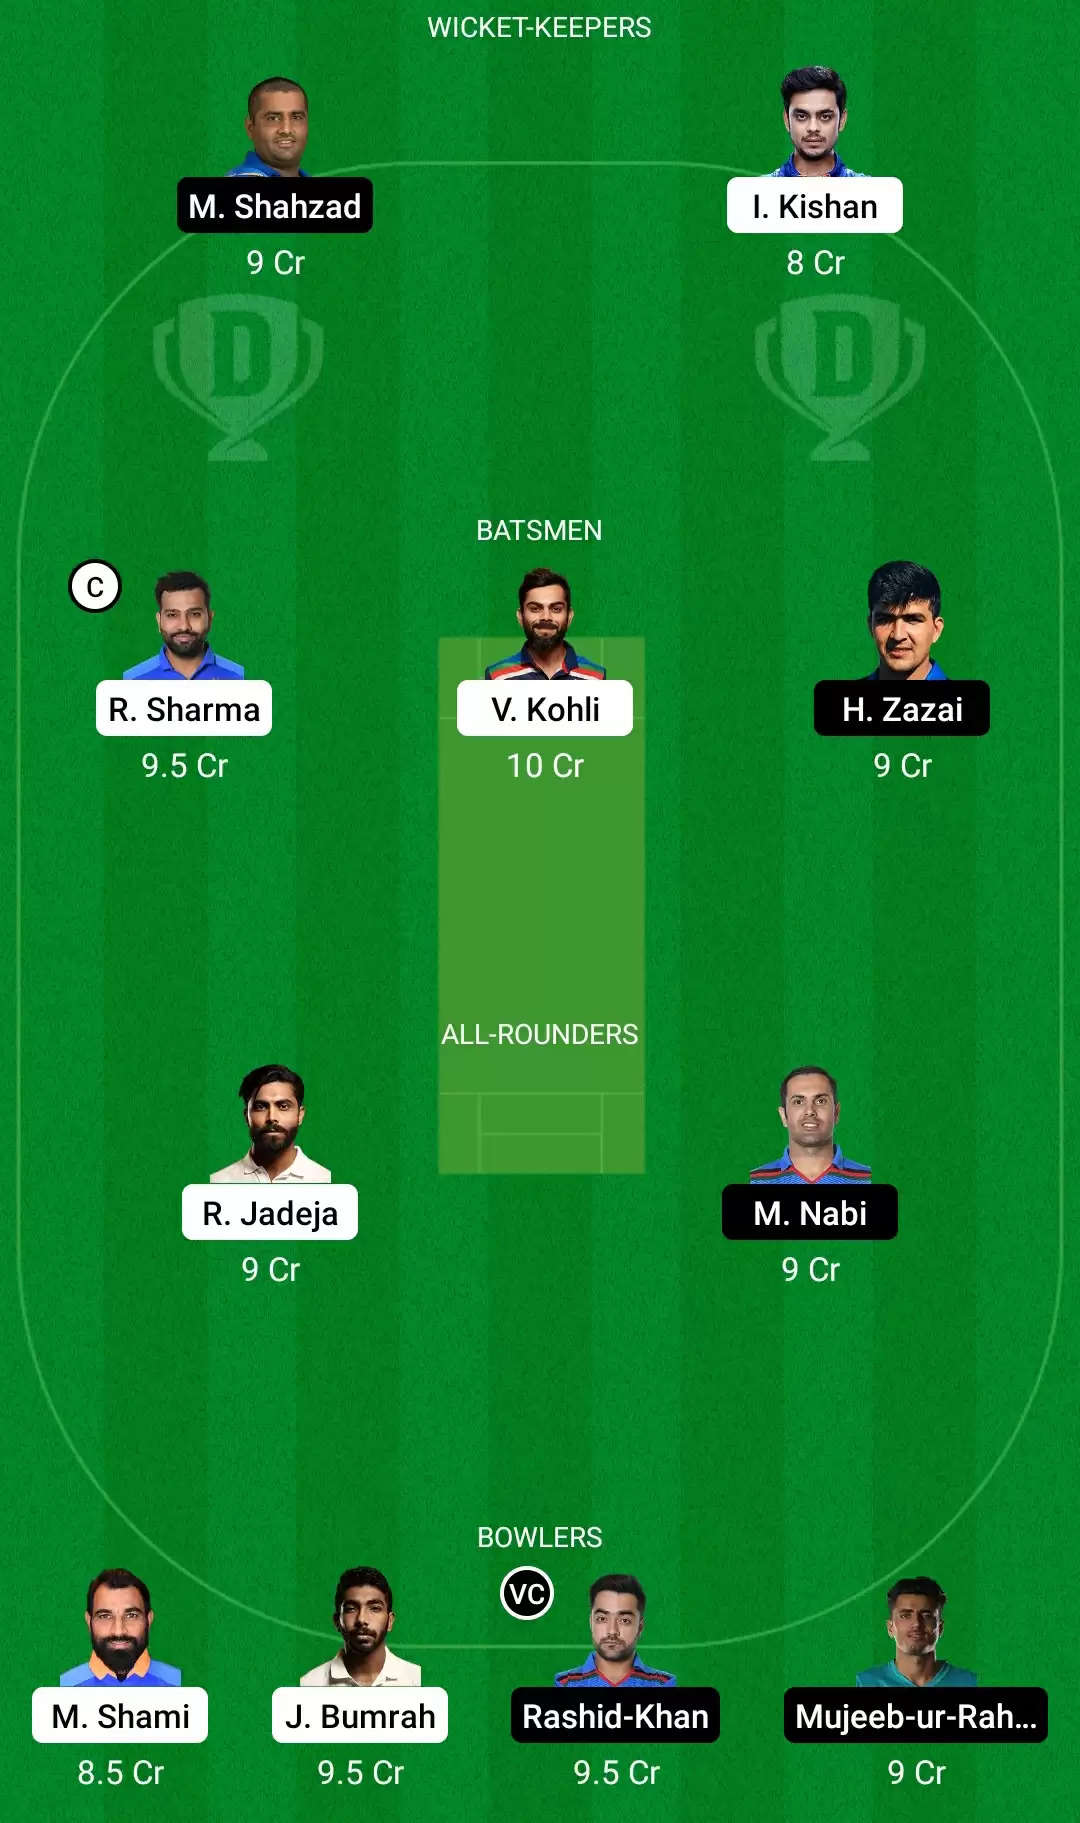 IND vs AFG Dream11 Prediction for T20 World Cup 2021: Playing XI, Fantasy Cricket Tips, Team, Weather Updates and Pitch Report